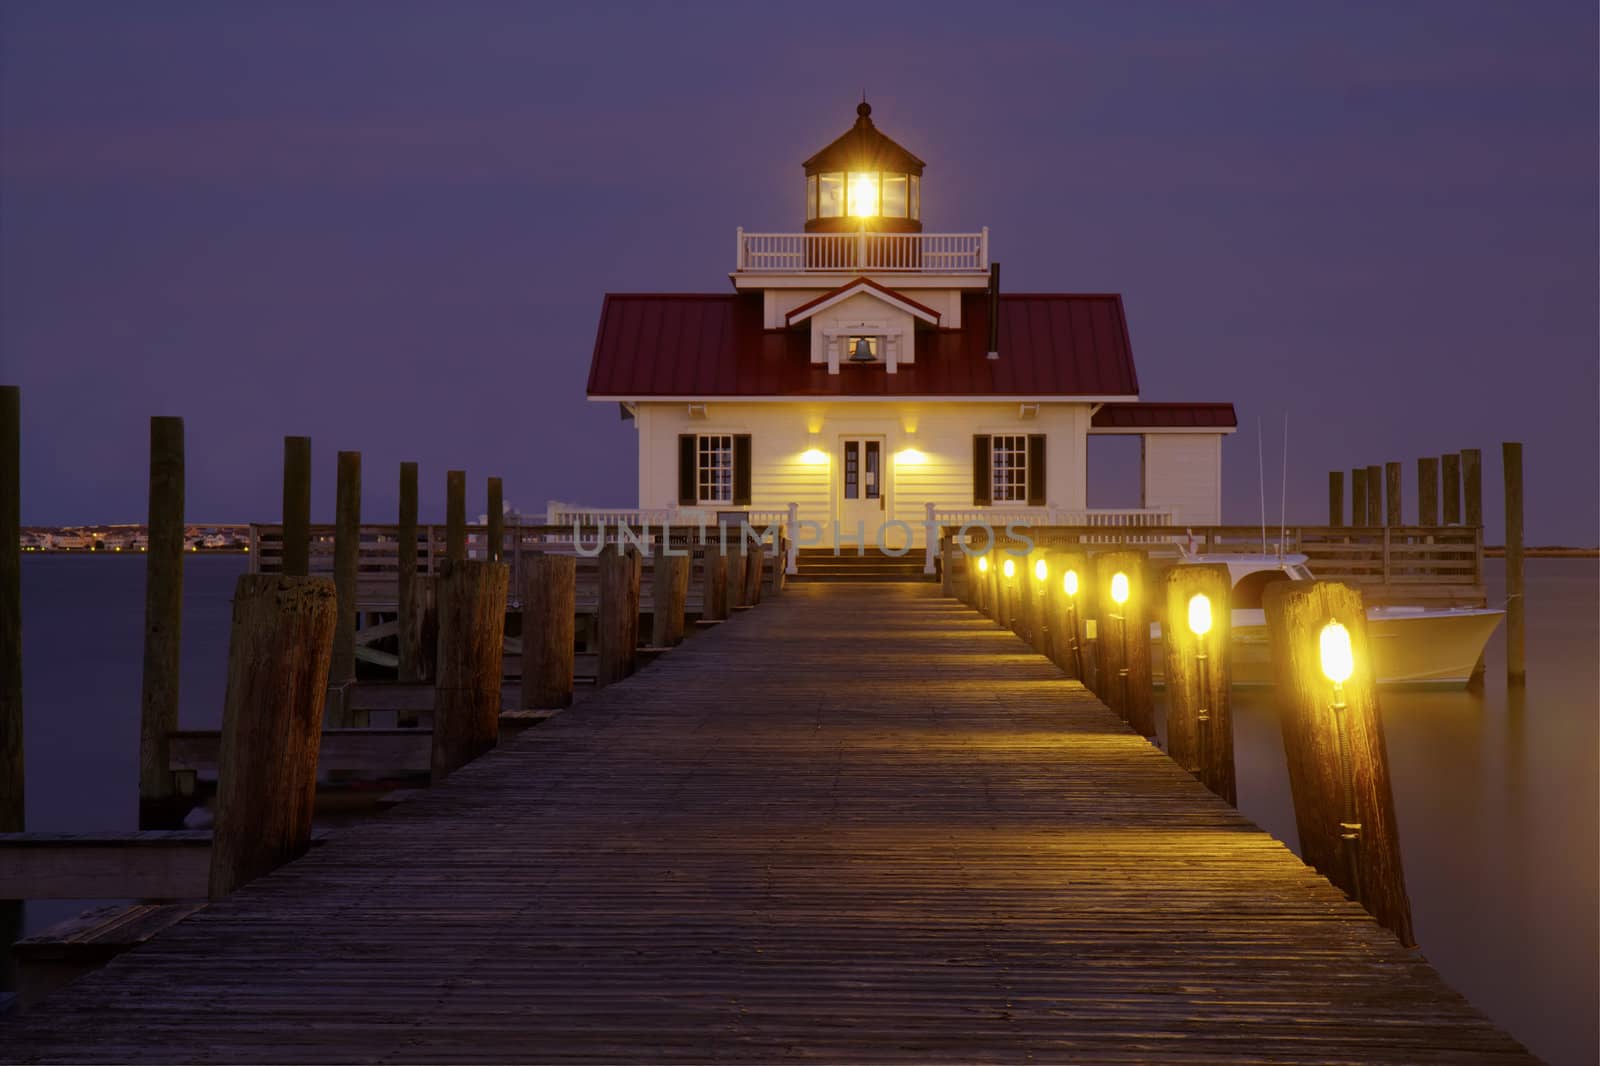 The Roanoke Marshes Lighthouse in Manteo, North Carolina, at dus by sgoodwin4813